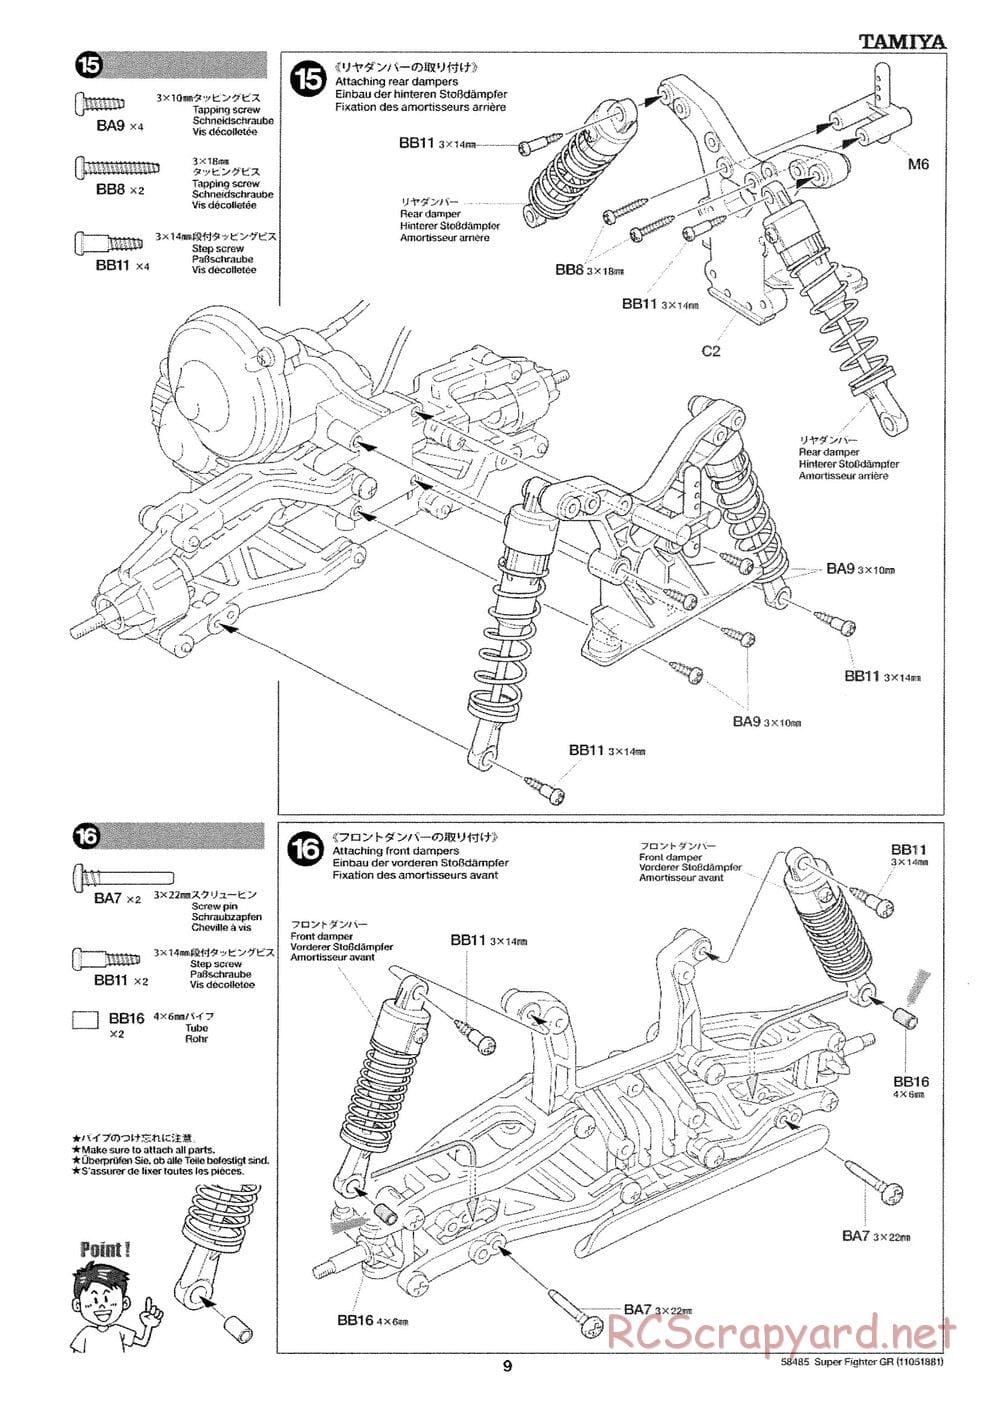 Tamiya - Super Fighter GR - DT-02 Chassis - Manual - Page 9